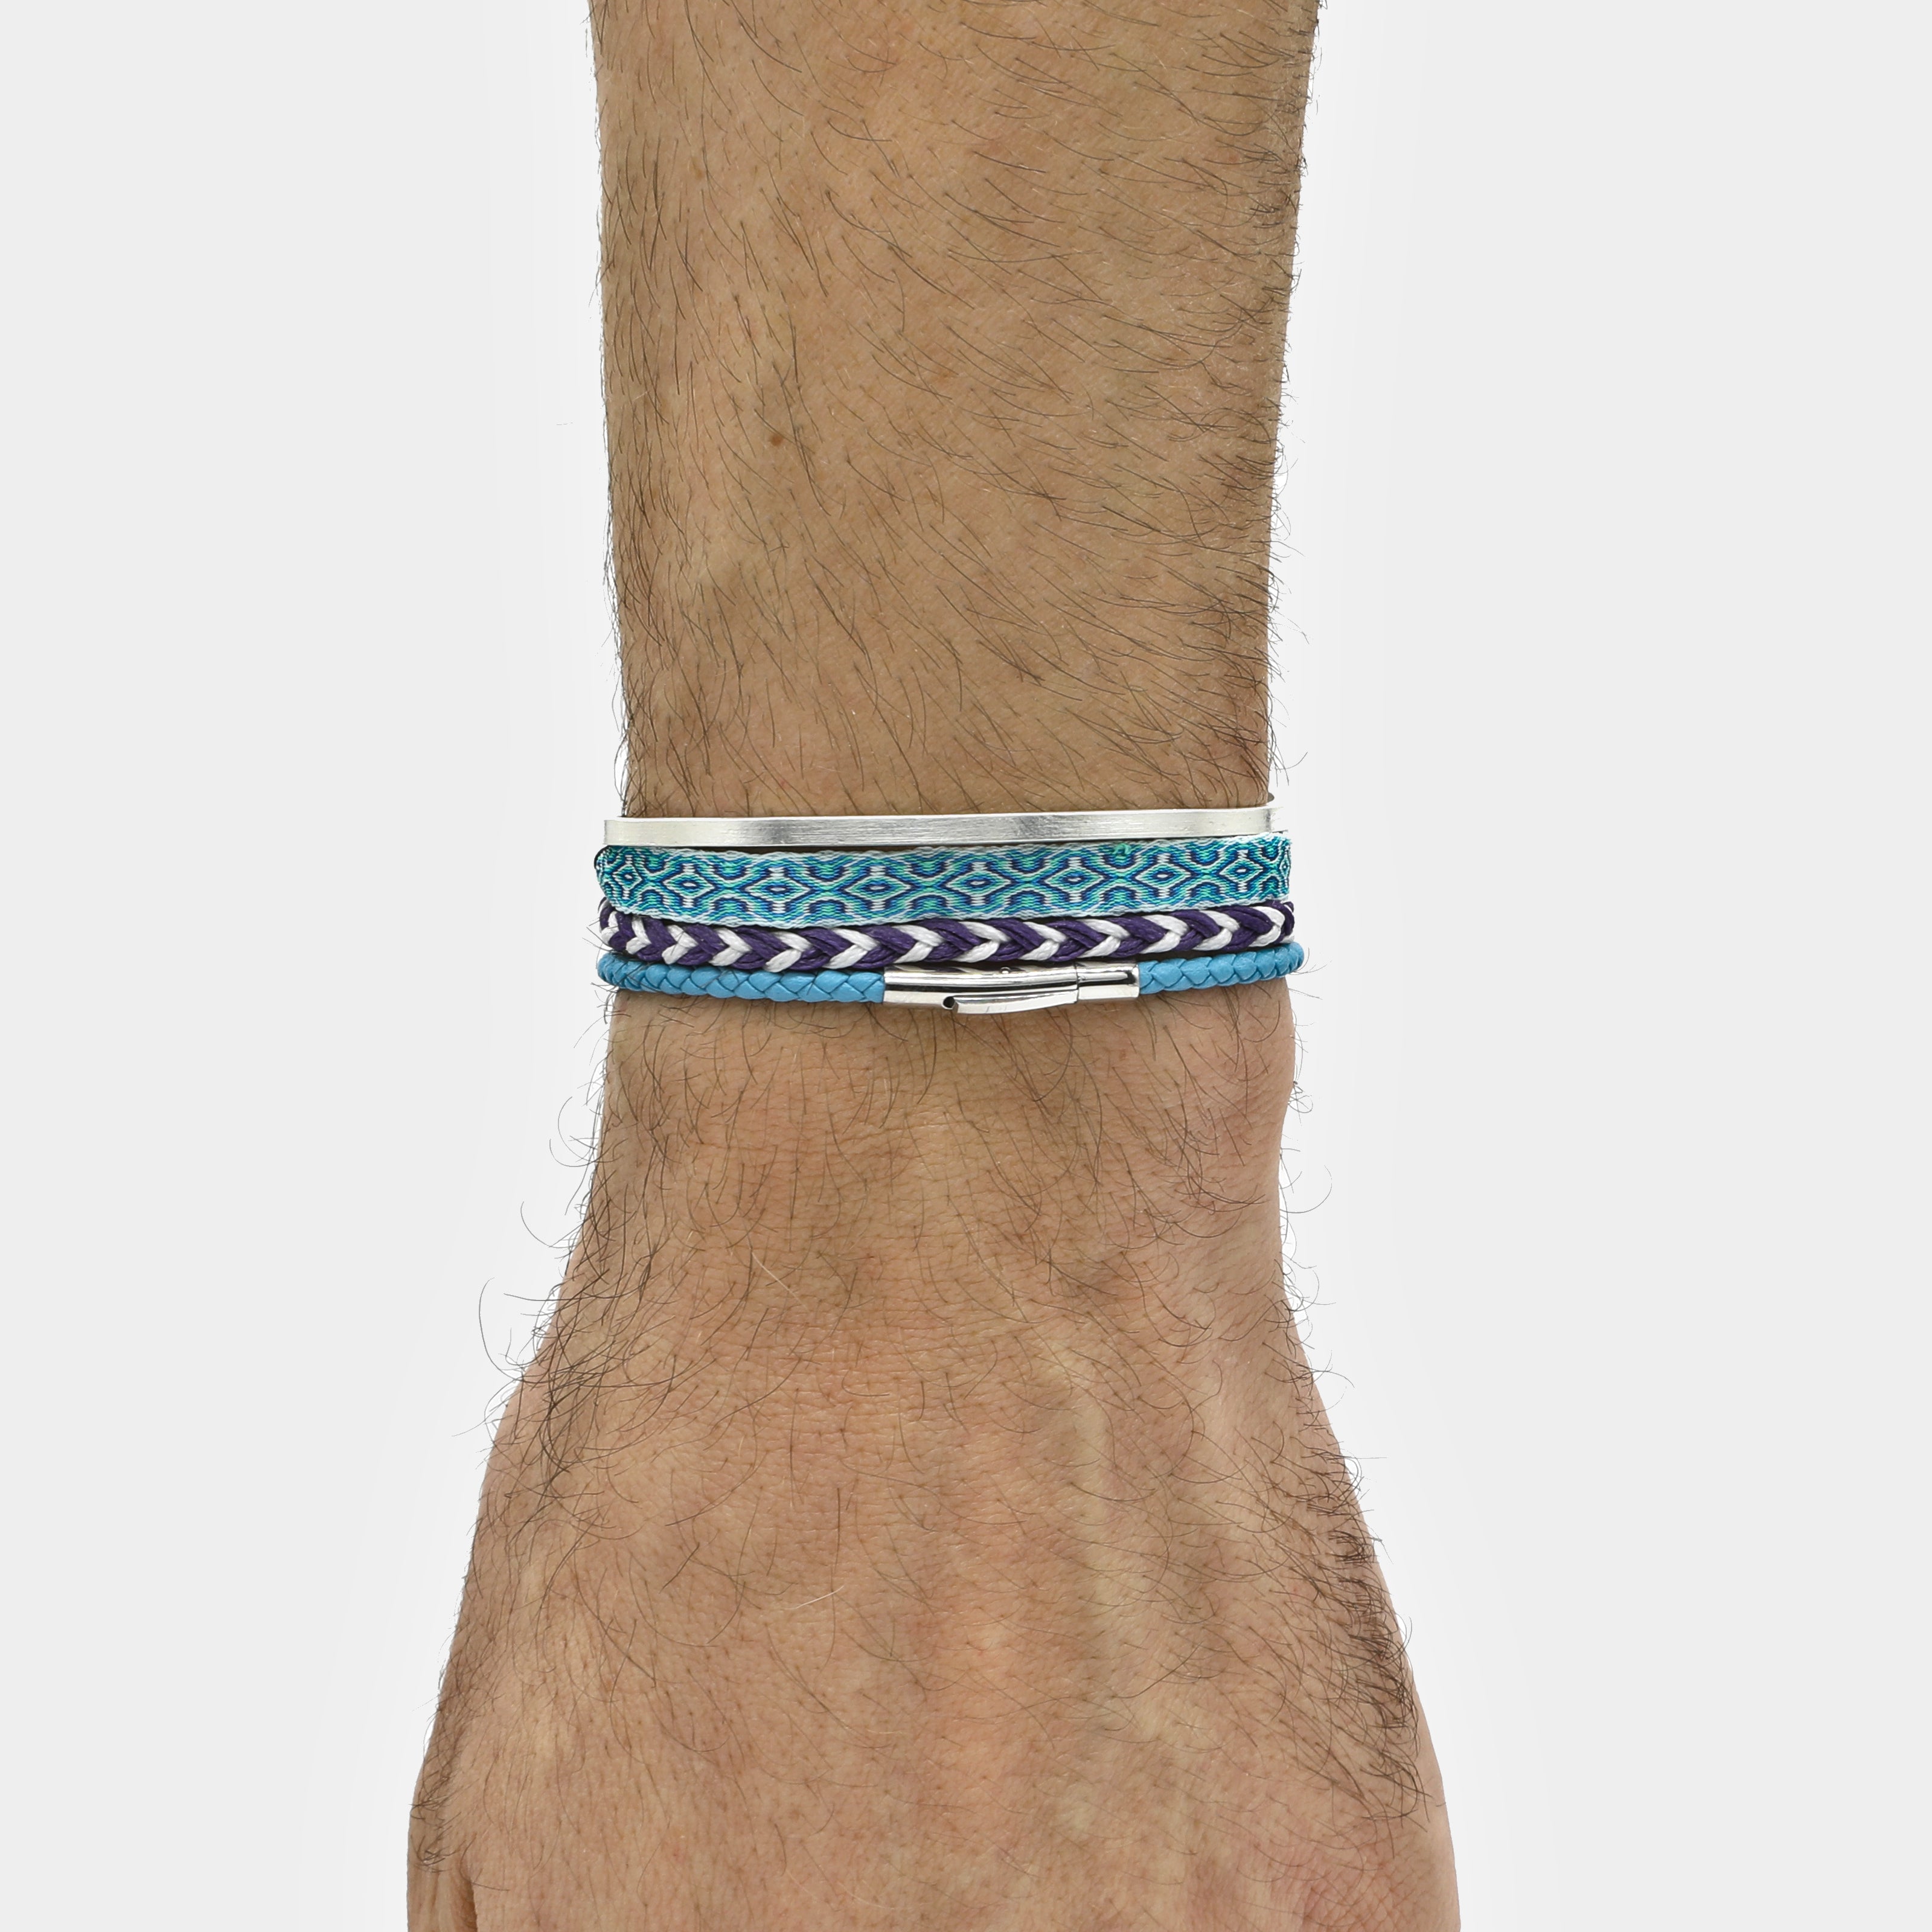 3mm Italian Leather Bracelet With Silver Clasp Turquoise Kompsos 3